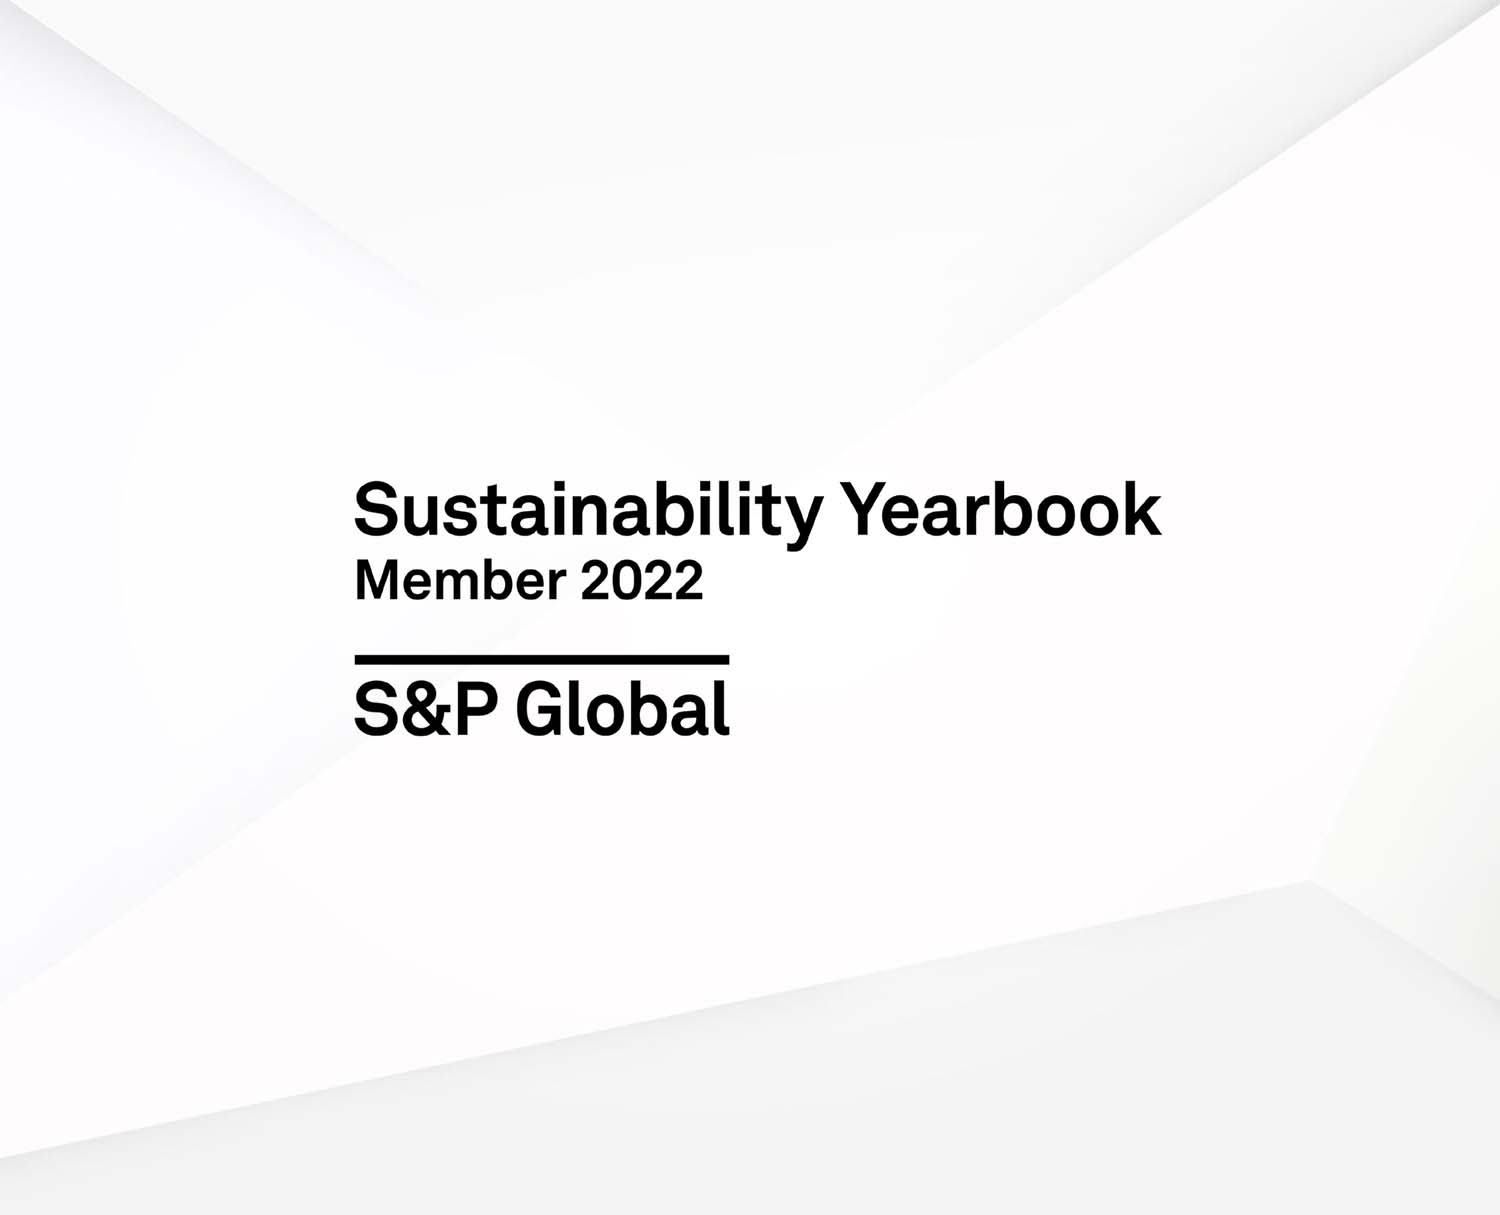 S&P Global Sustainability Yearbook Member 2022